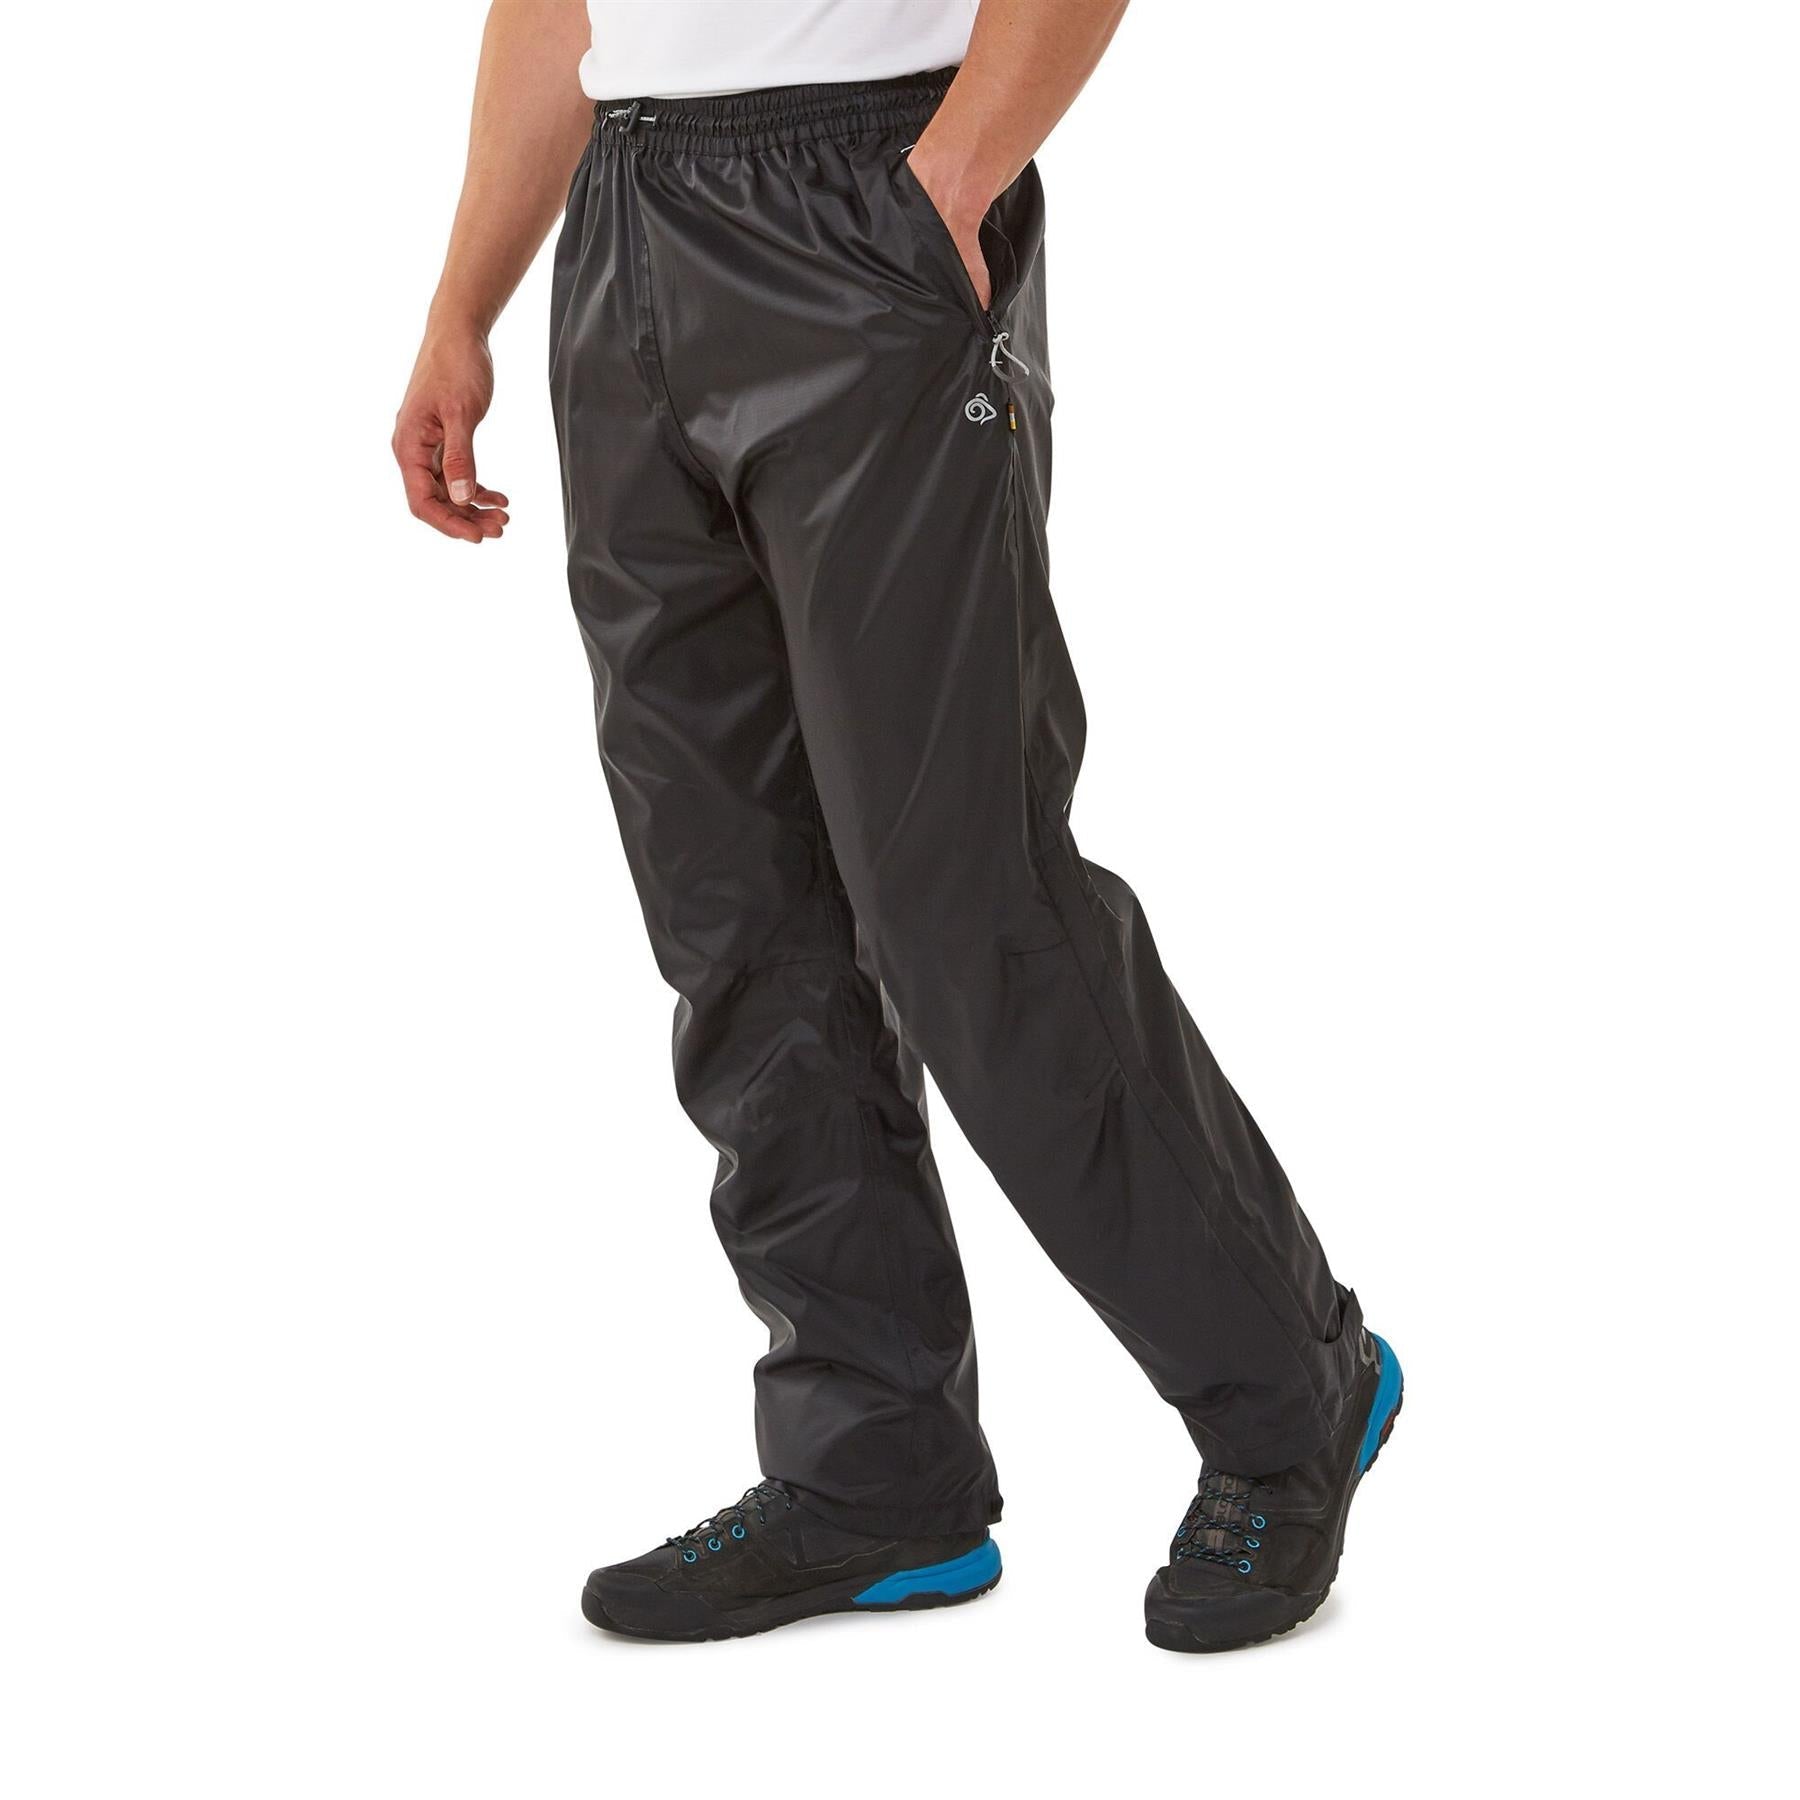 Craghoppers Mens C65 Basecamp Lightweight Casual Walking Trousers | eBay